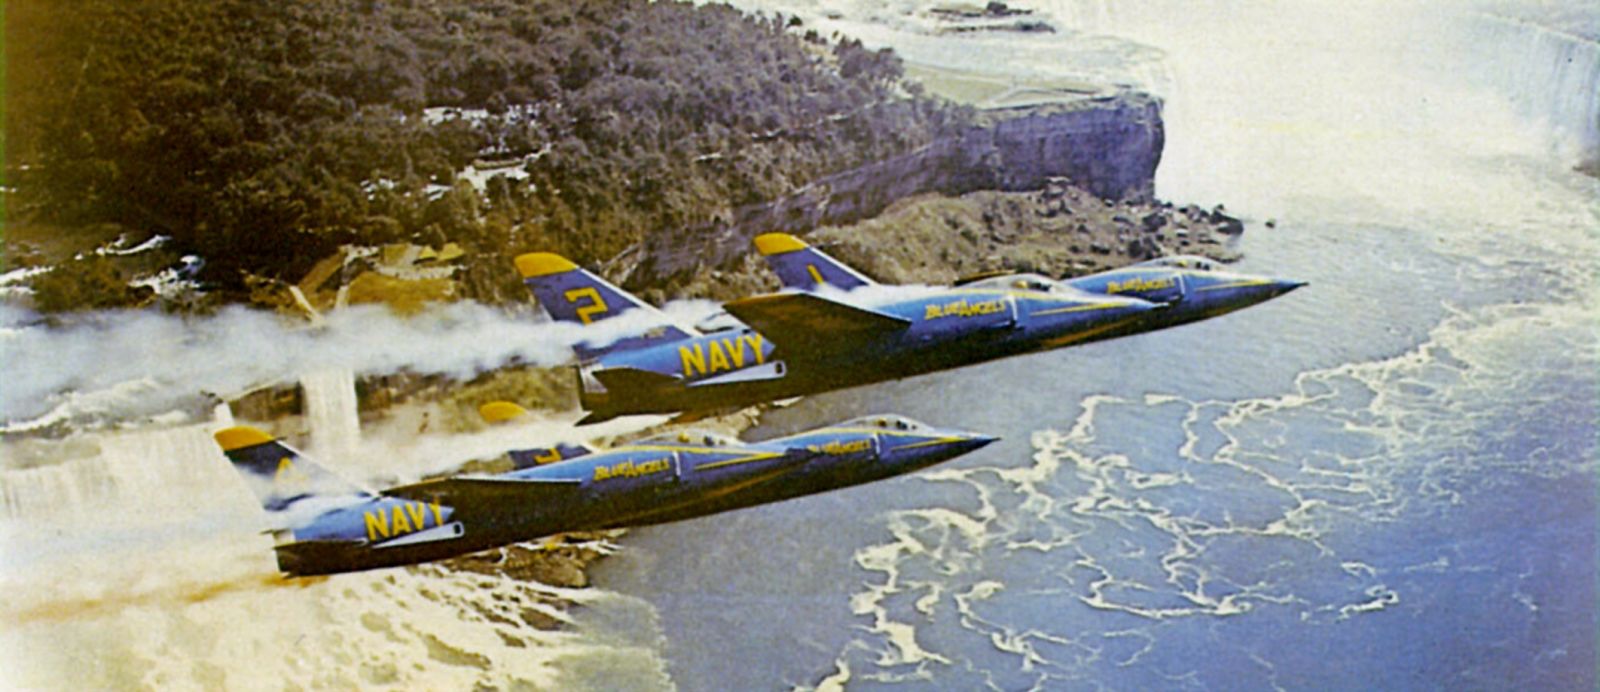 U.S. Navy Grumman F11F-1 Tiger fighters from the “Blue Angels” aerobatics team, flying over the Niagara Falls, New York (USA). The “Blue Angels” originally flew the F11F “short nose” version.